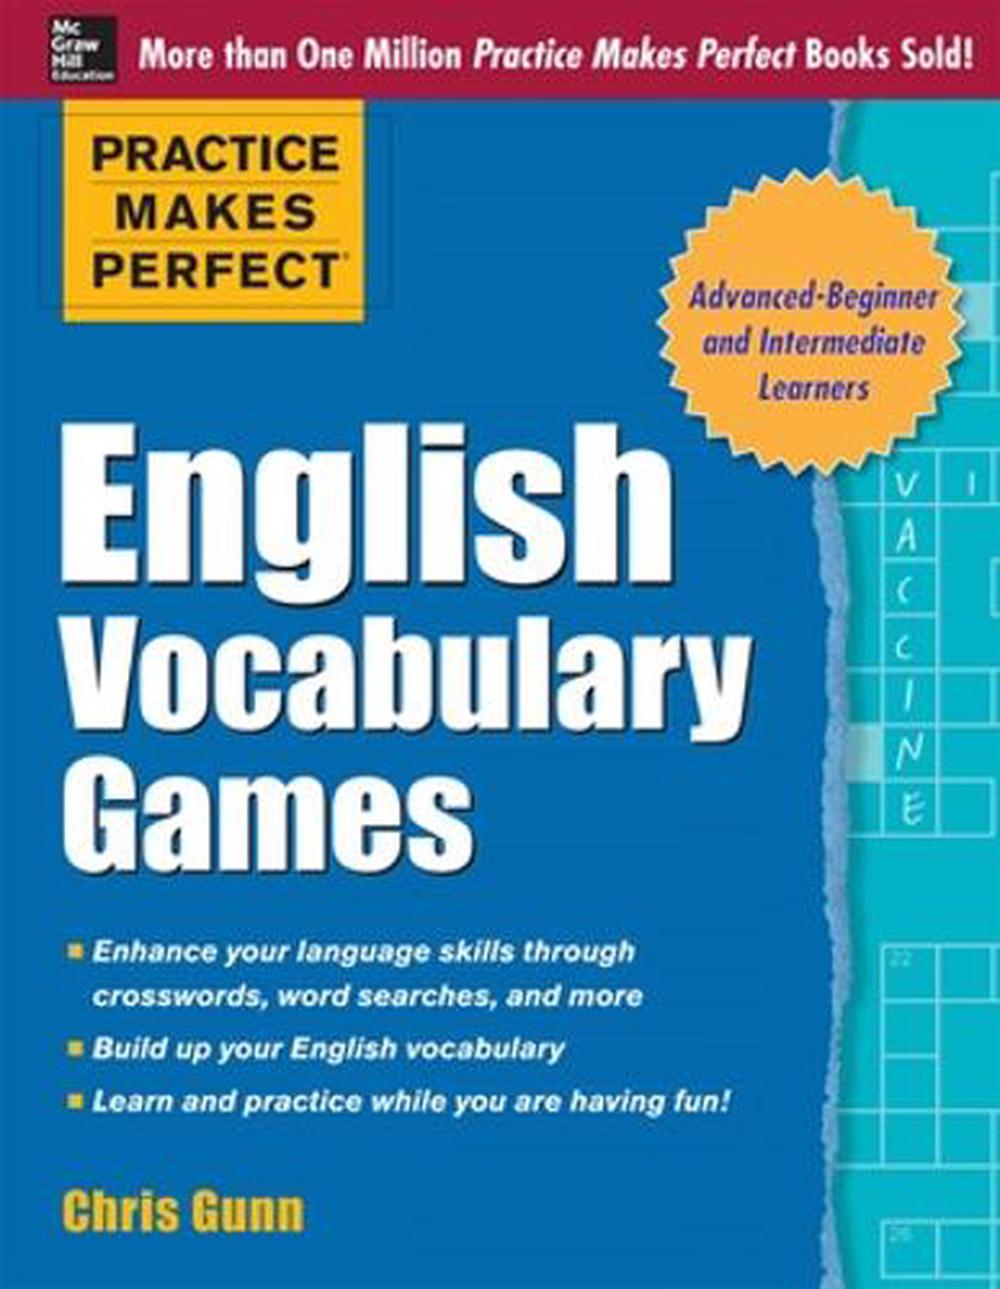 Vocabulary　Buy　The　Chris　Games　9780071820721　Practice　Perfect　Paperback,　at　online　Makes　English　Gunn,　by　Nile